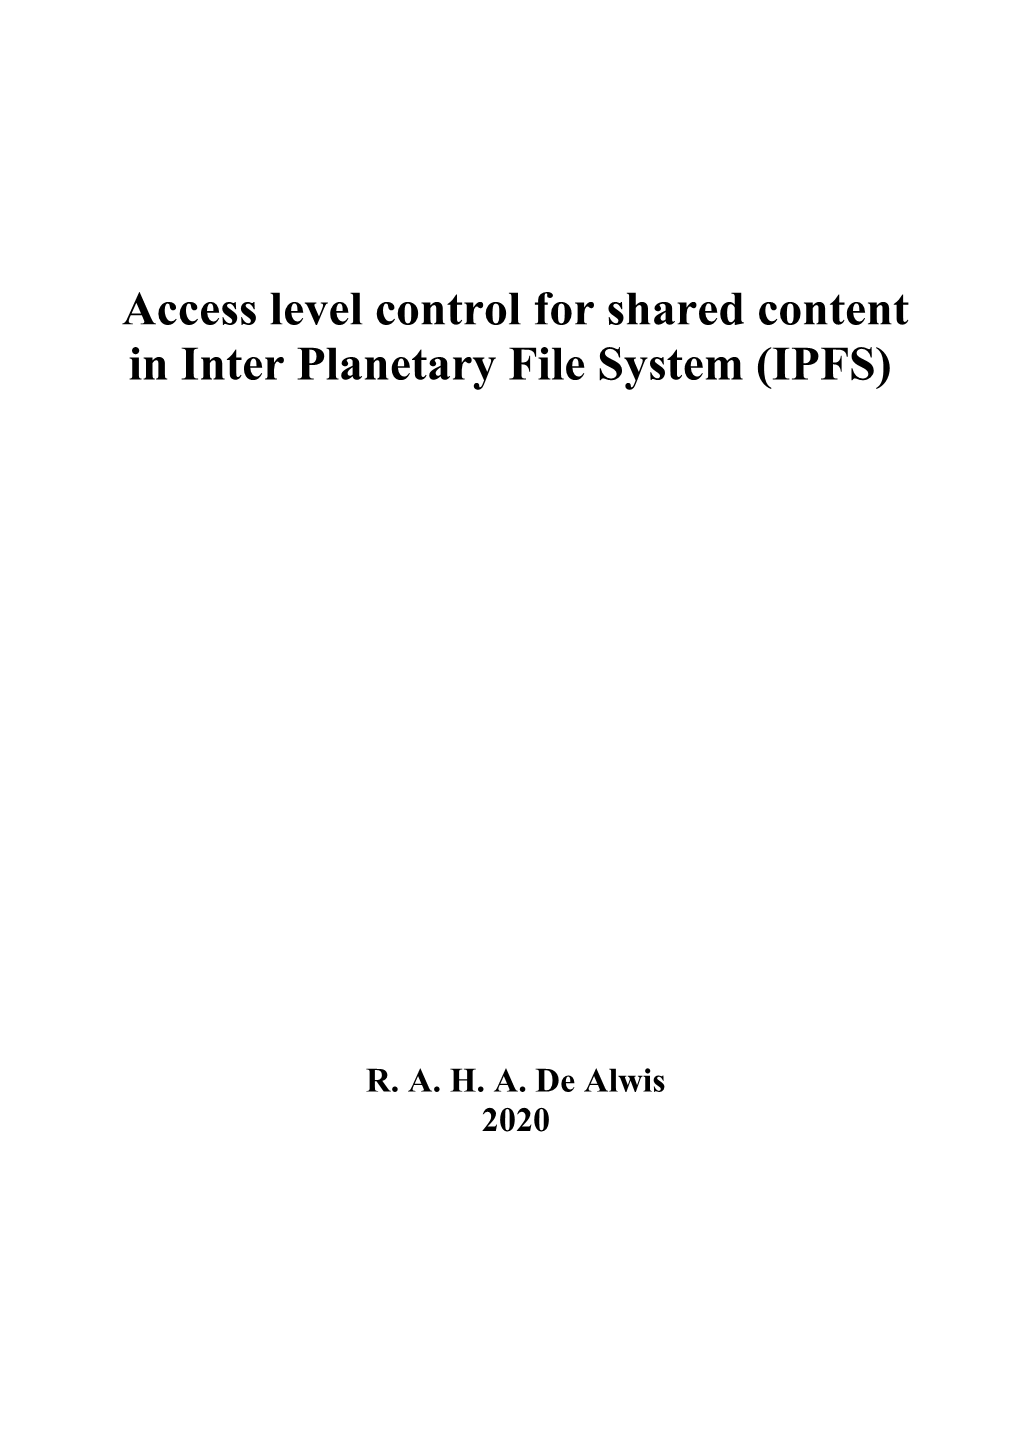 Access Level Control for Shared Content in Inter Planetary File System (IPFS)